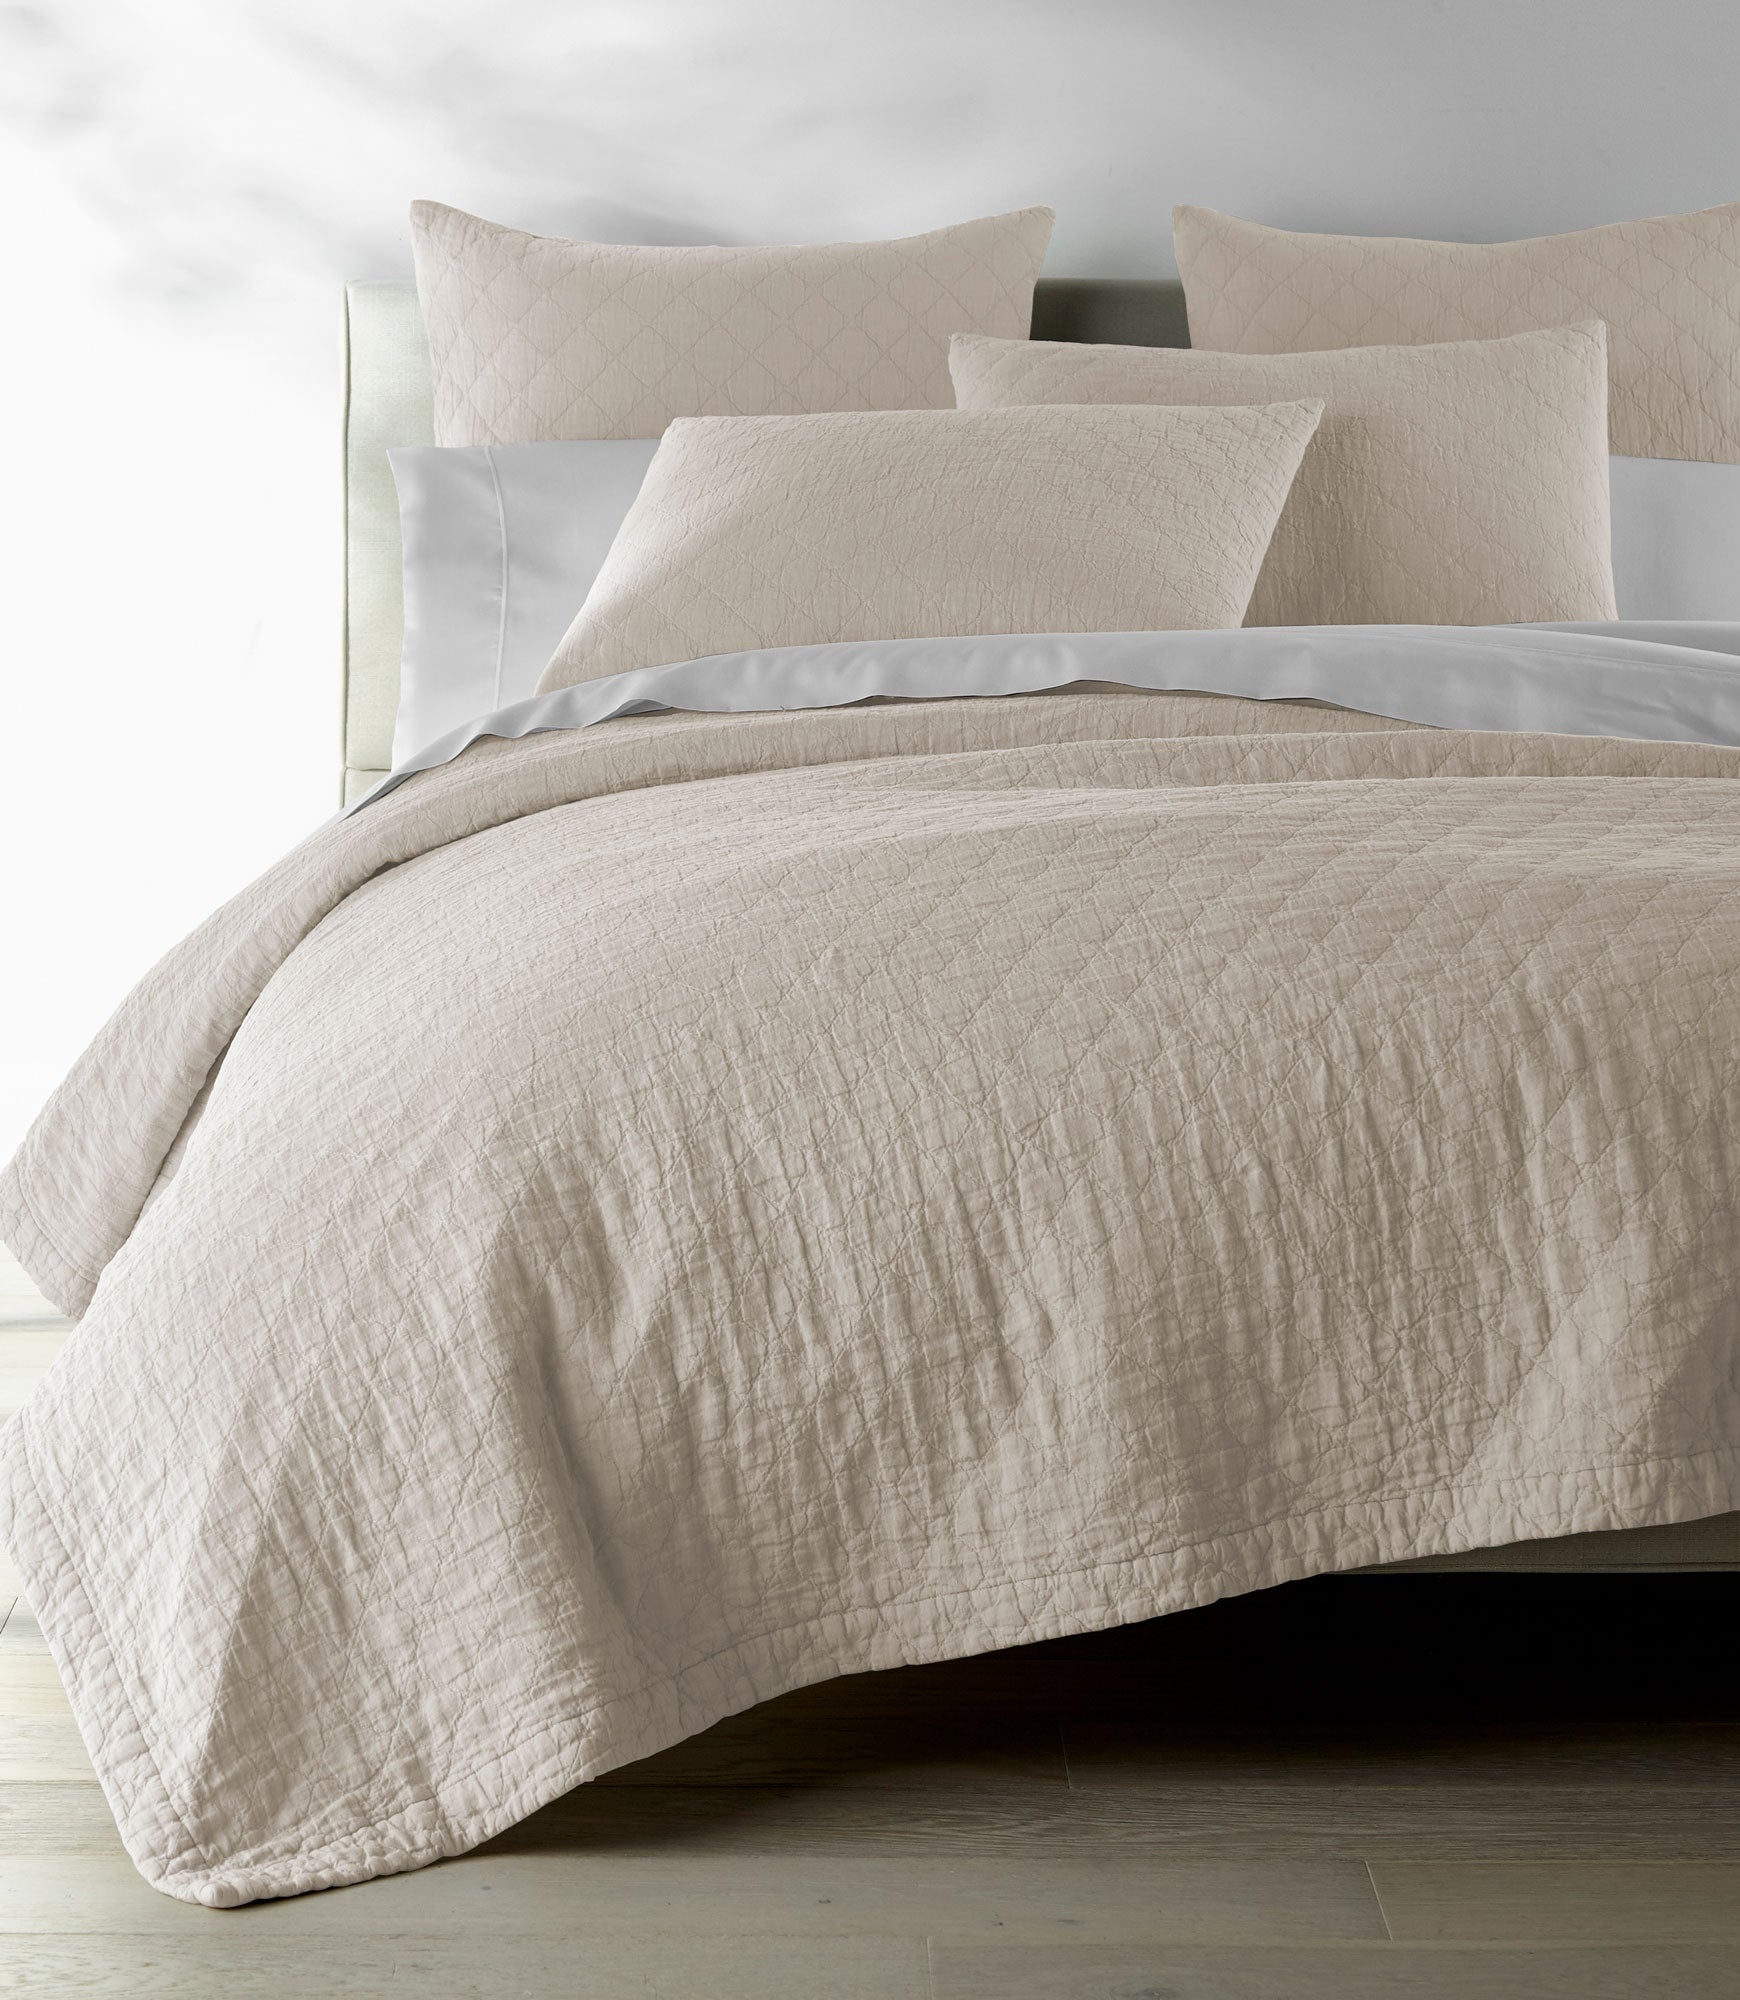 Home - Heirlooms Fine Linens